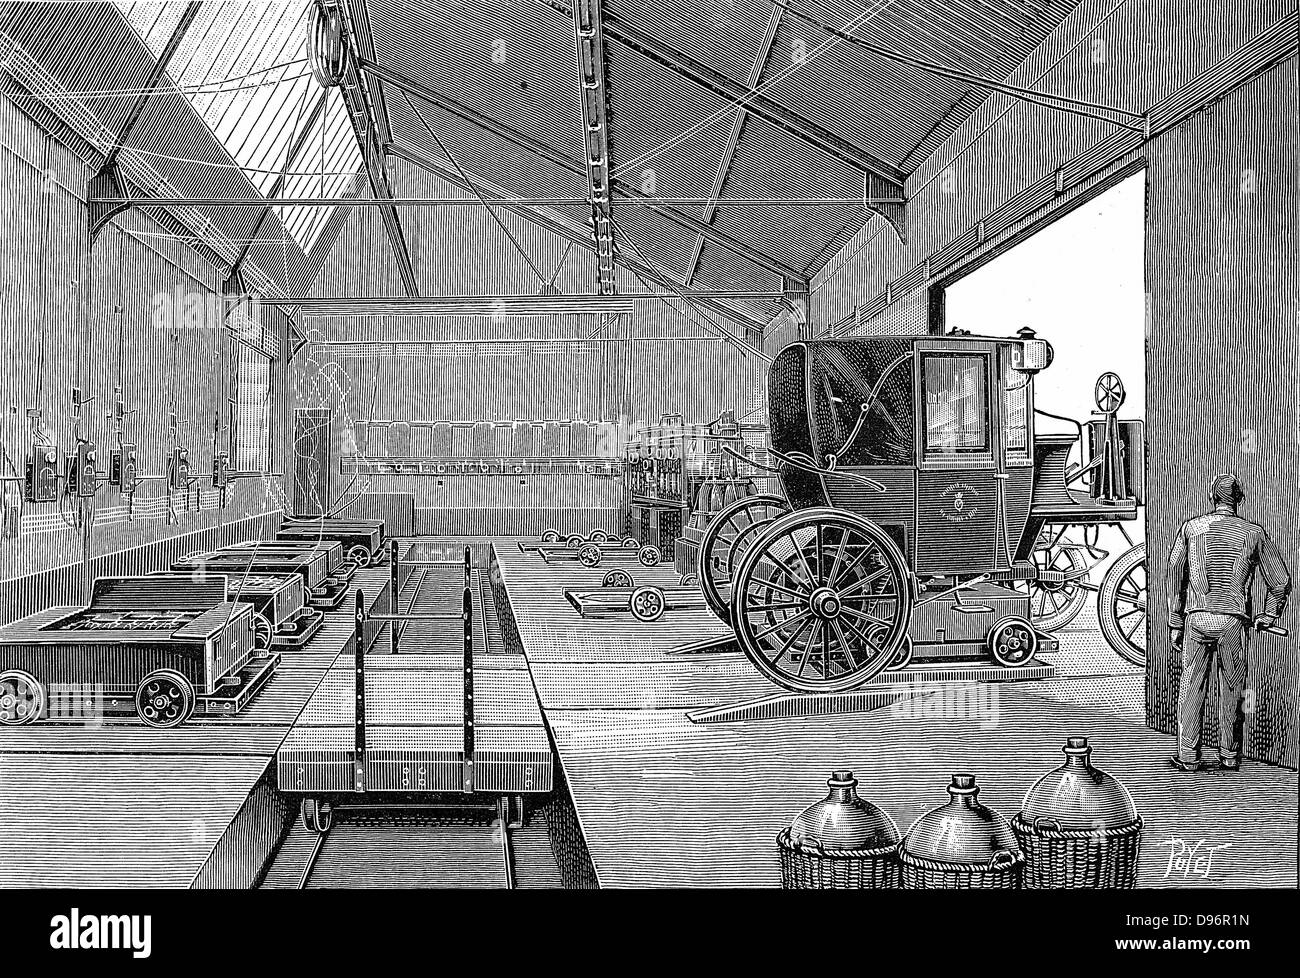 Depot at Rue Cardinet where electrically driven Paris cabs were fitted with freshly charged batteries. At front right are glass carboys in protective wicker jackets. These contained acid used in batteries  From 'La Nature' Paris 1899. Stock Photo